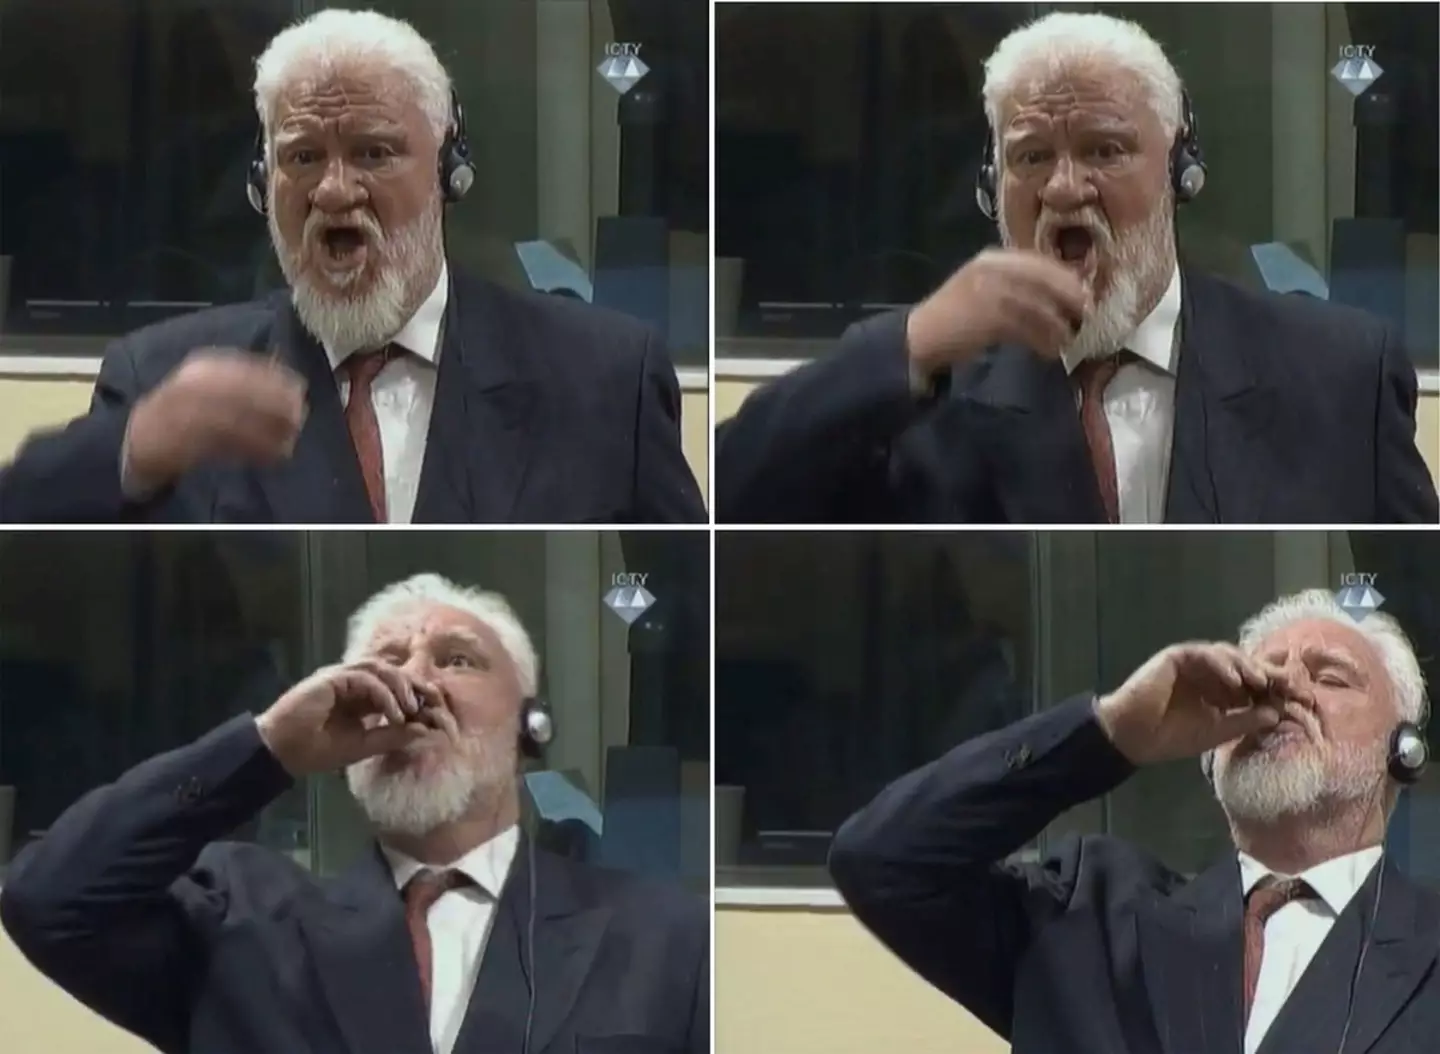 Praljak died after drinking poison in court (ICTY/Anadolu Agency/Getty Images)